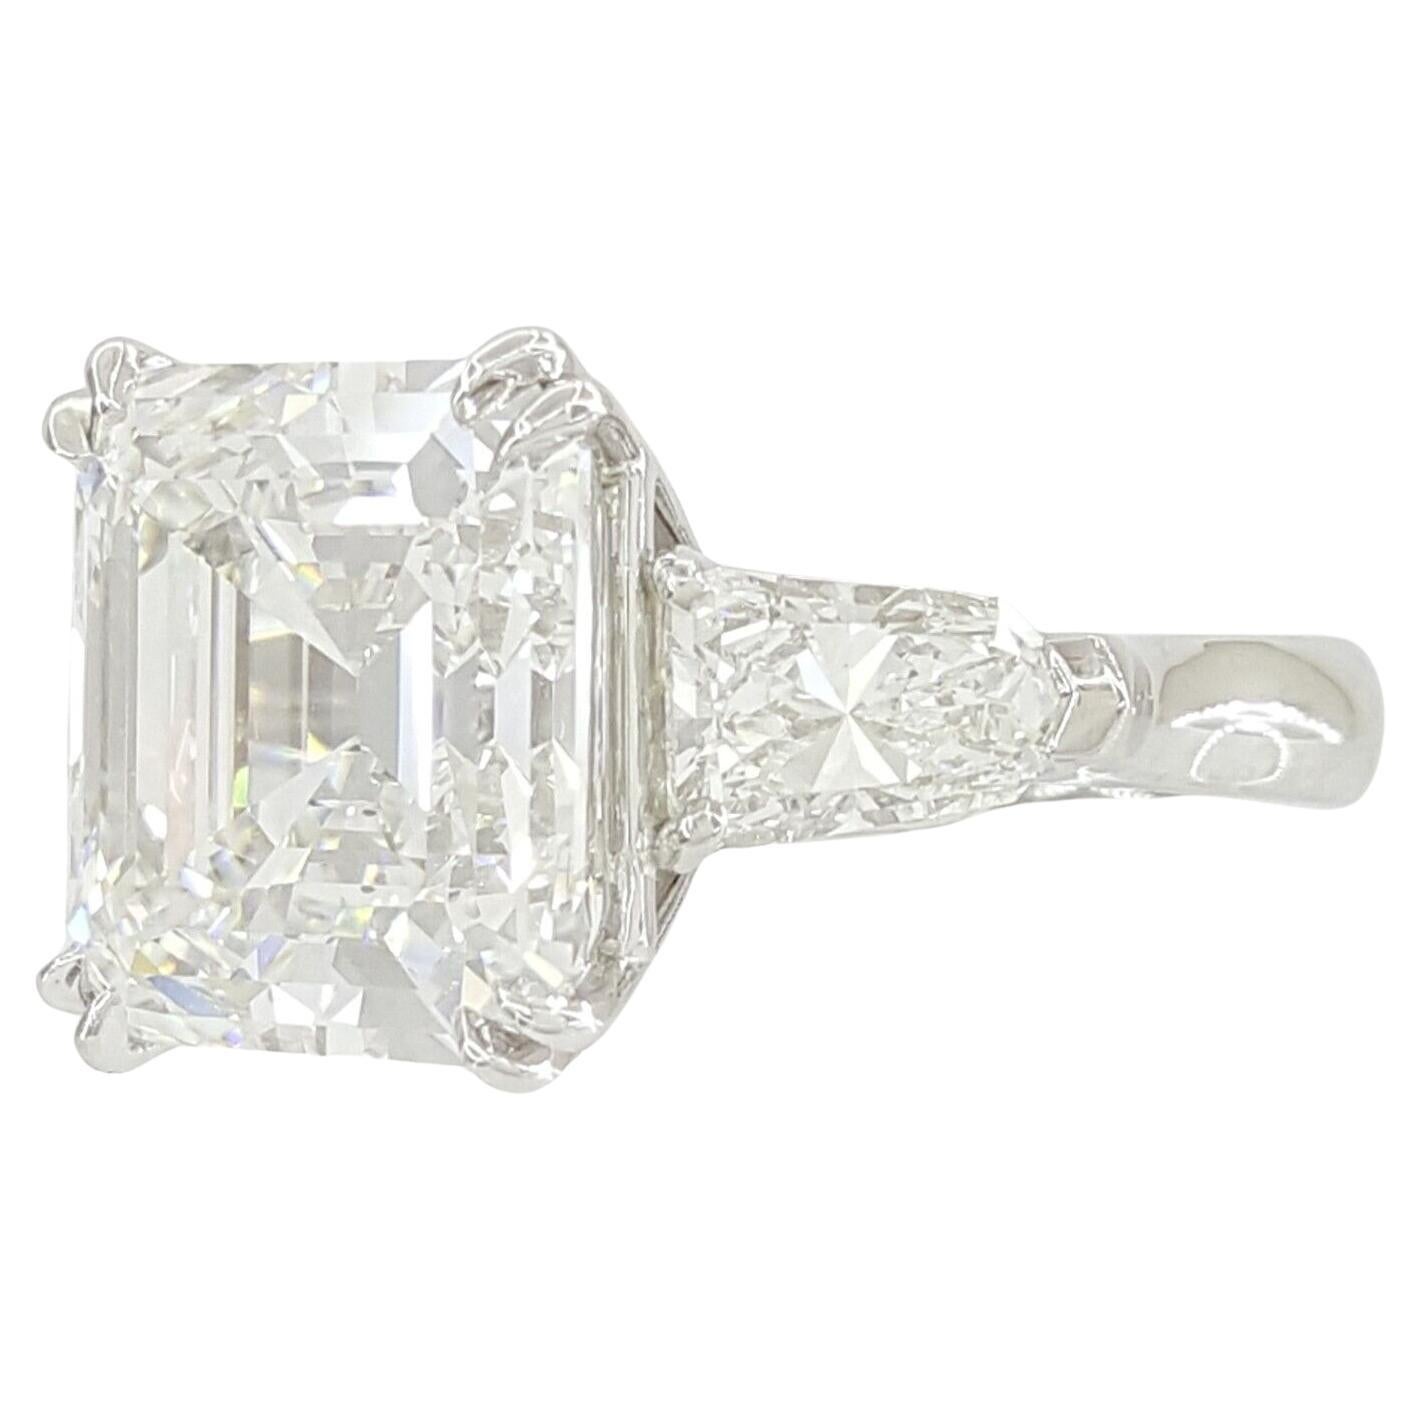 Presenting an exquisite masterpiece from the renowned Italian jeweler, Antinori di Sanpietro ROMA, this remarkable ring features a spectacular 10-carat emerald-cut diamond certified by GIA. Graded as E for Color and I FLawless for clarity, this